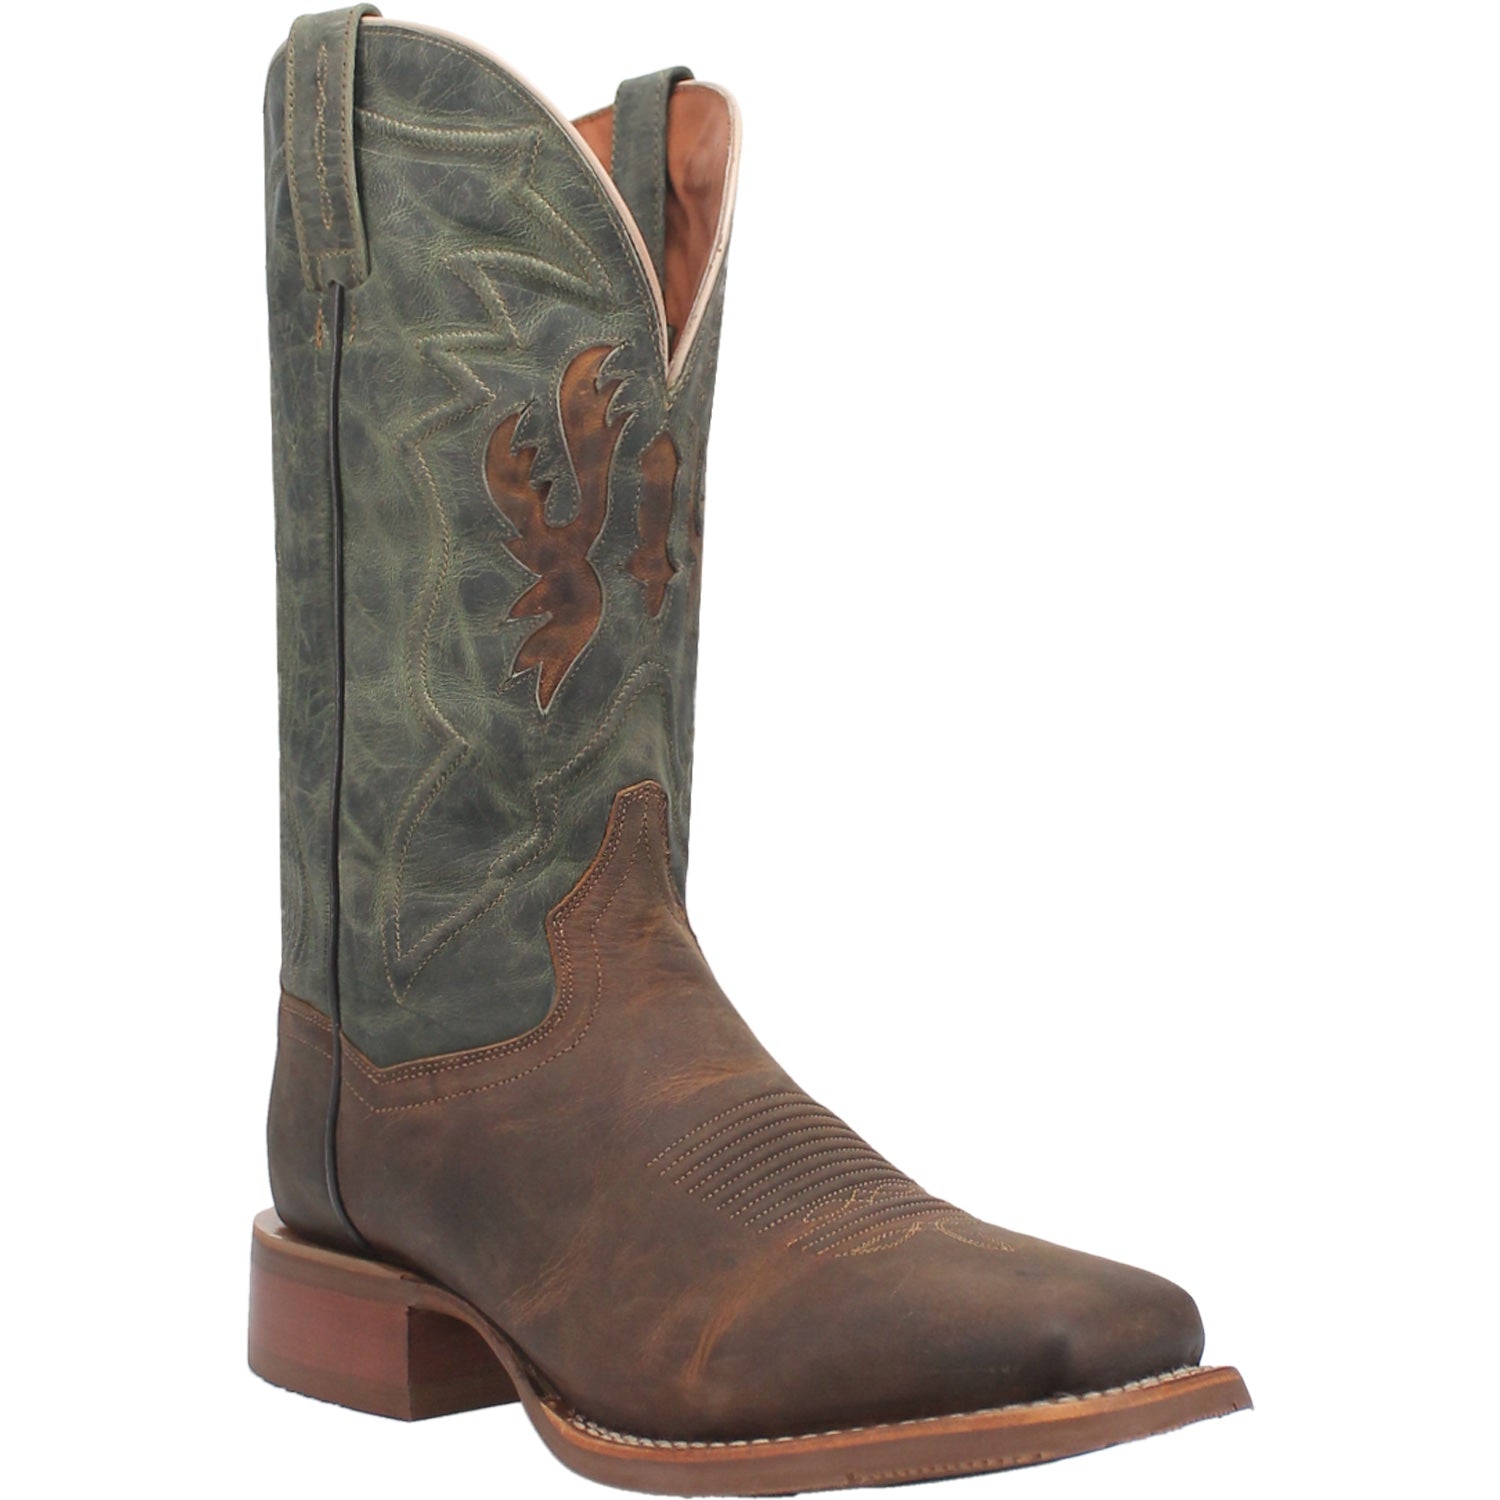 JACOB LEATHER BOOT Cover